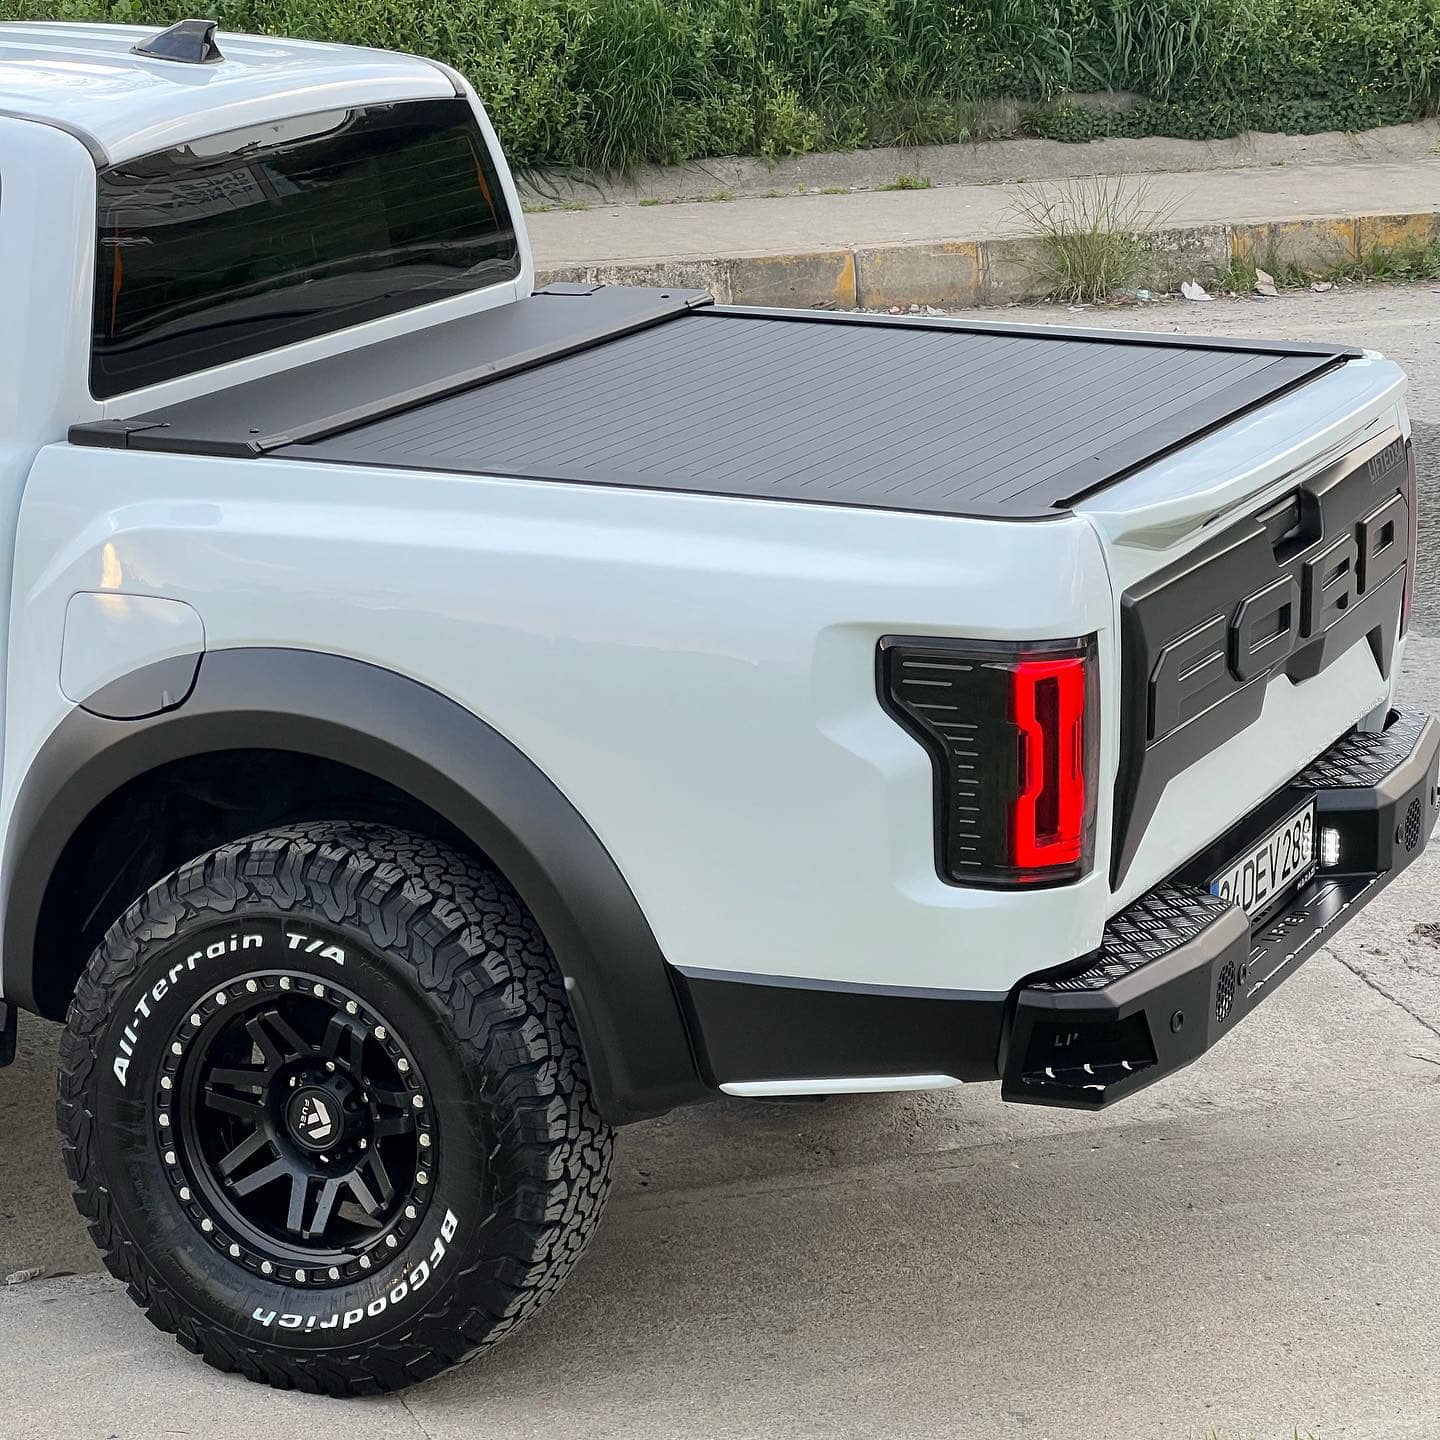 Ford Ranger with F150 Raptor Style LED taillights and rear bumper